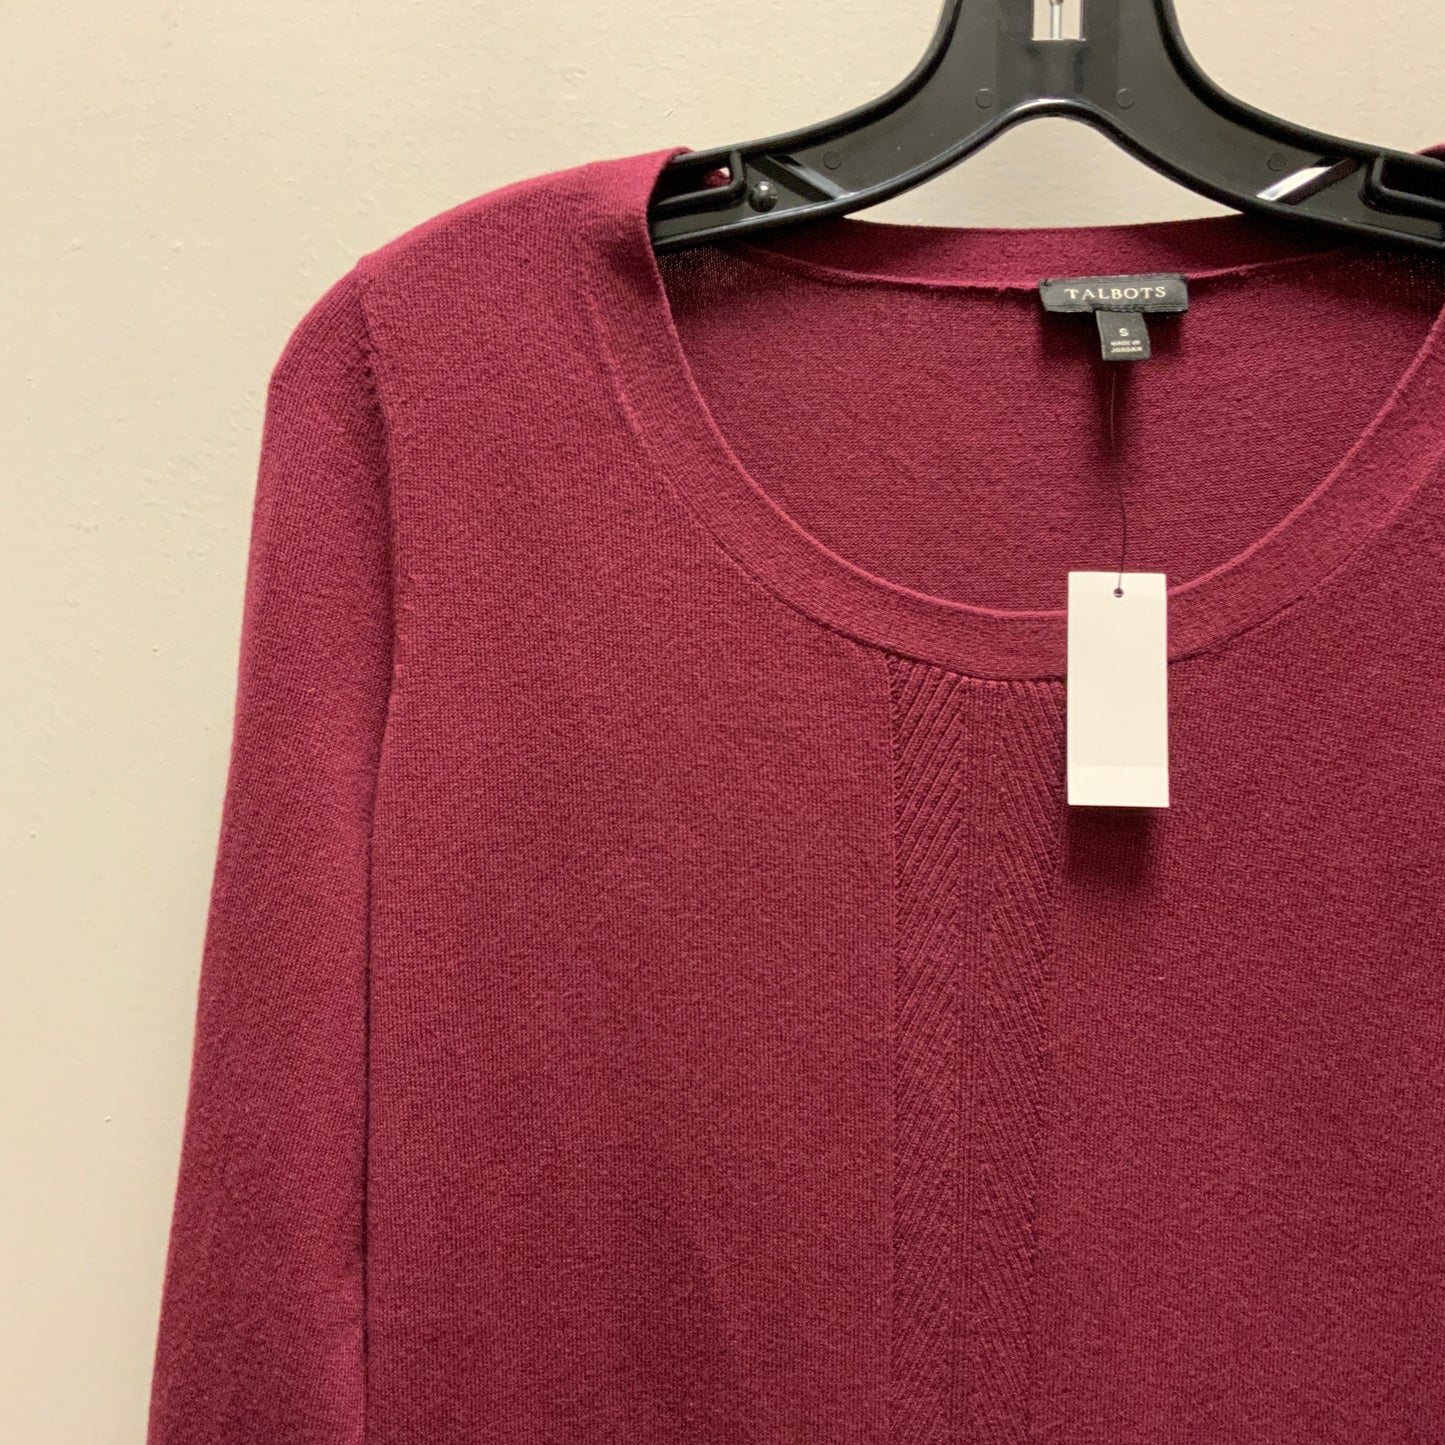 Sweater By Talbots  Size: S